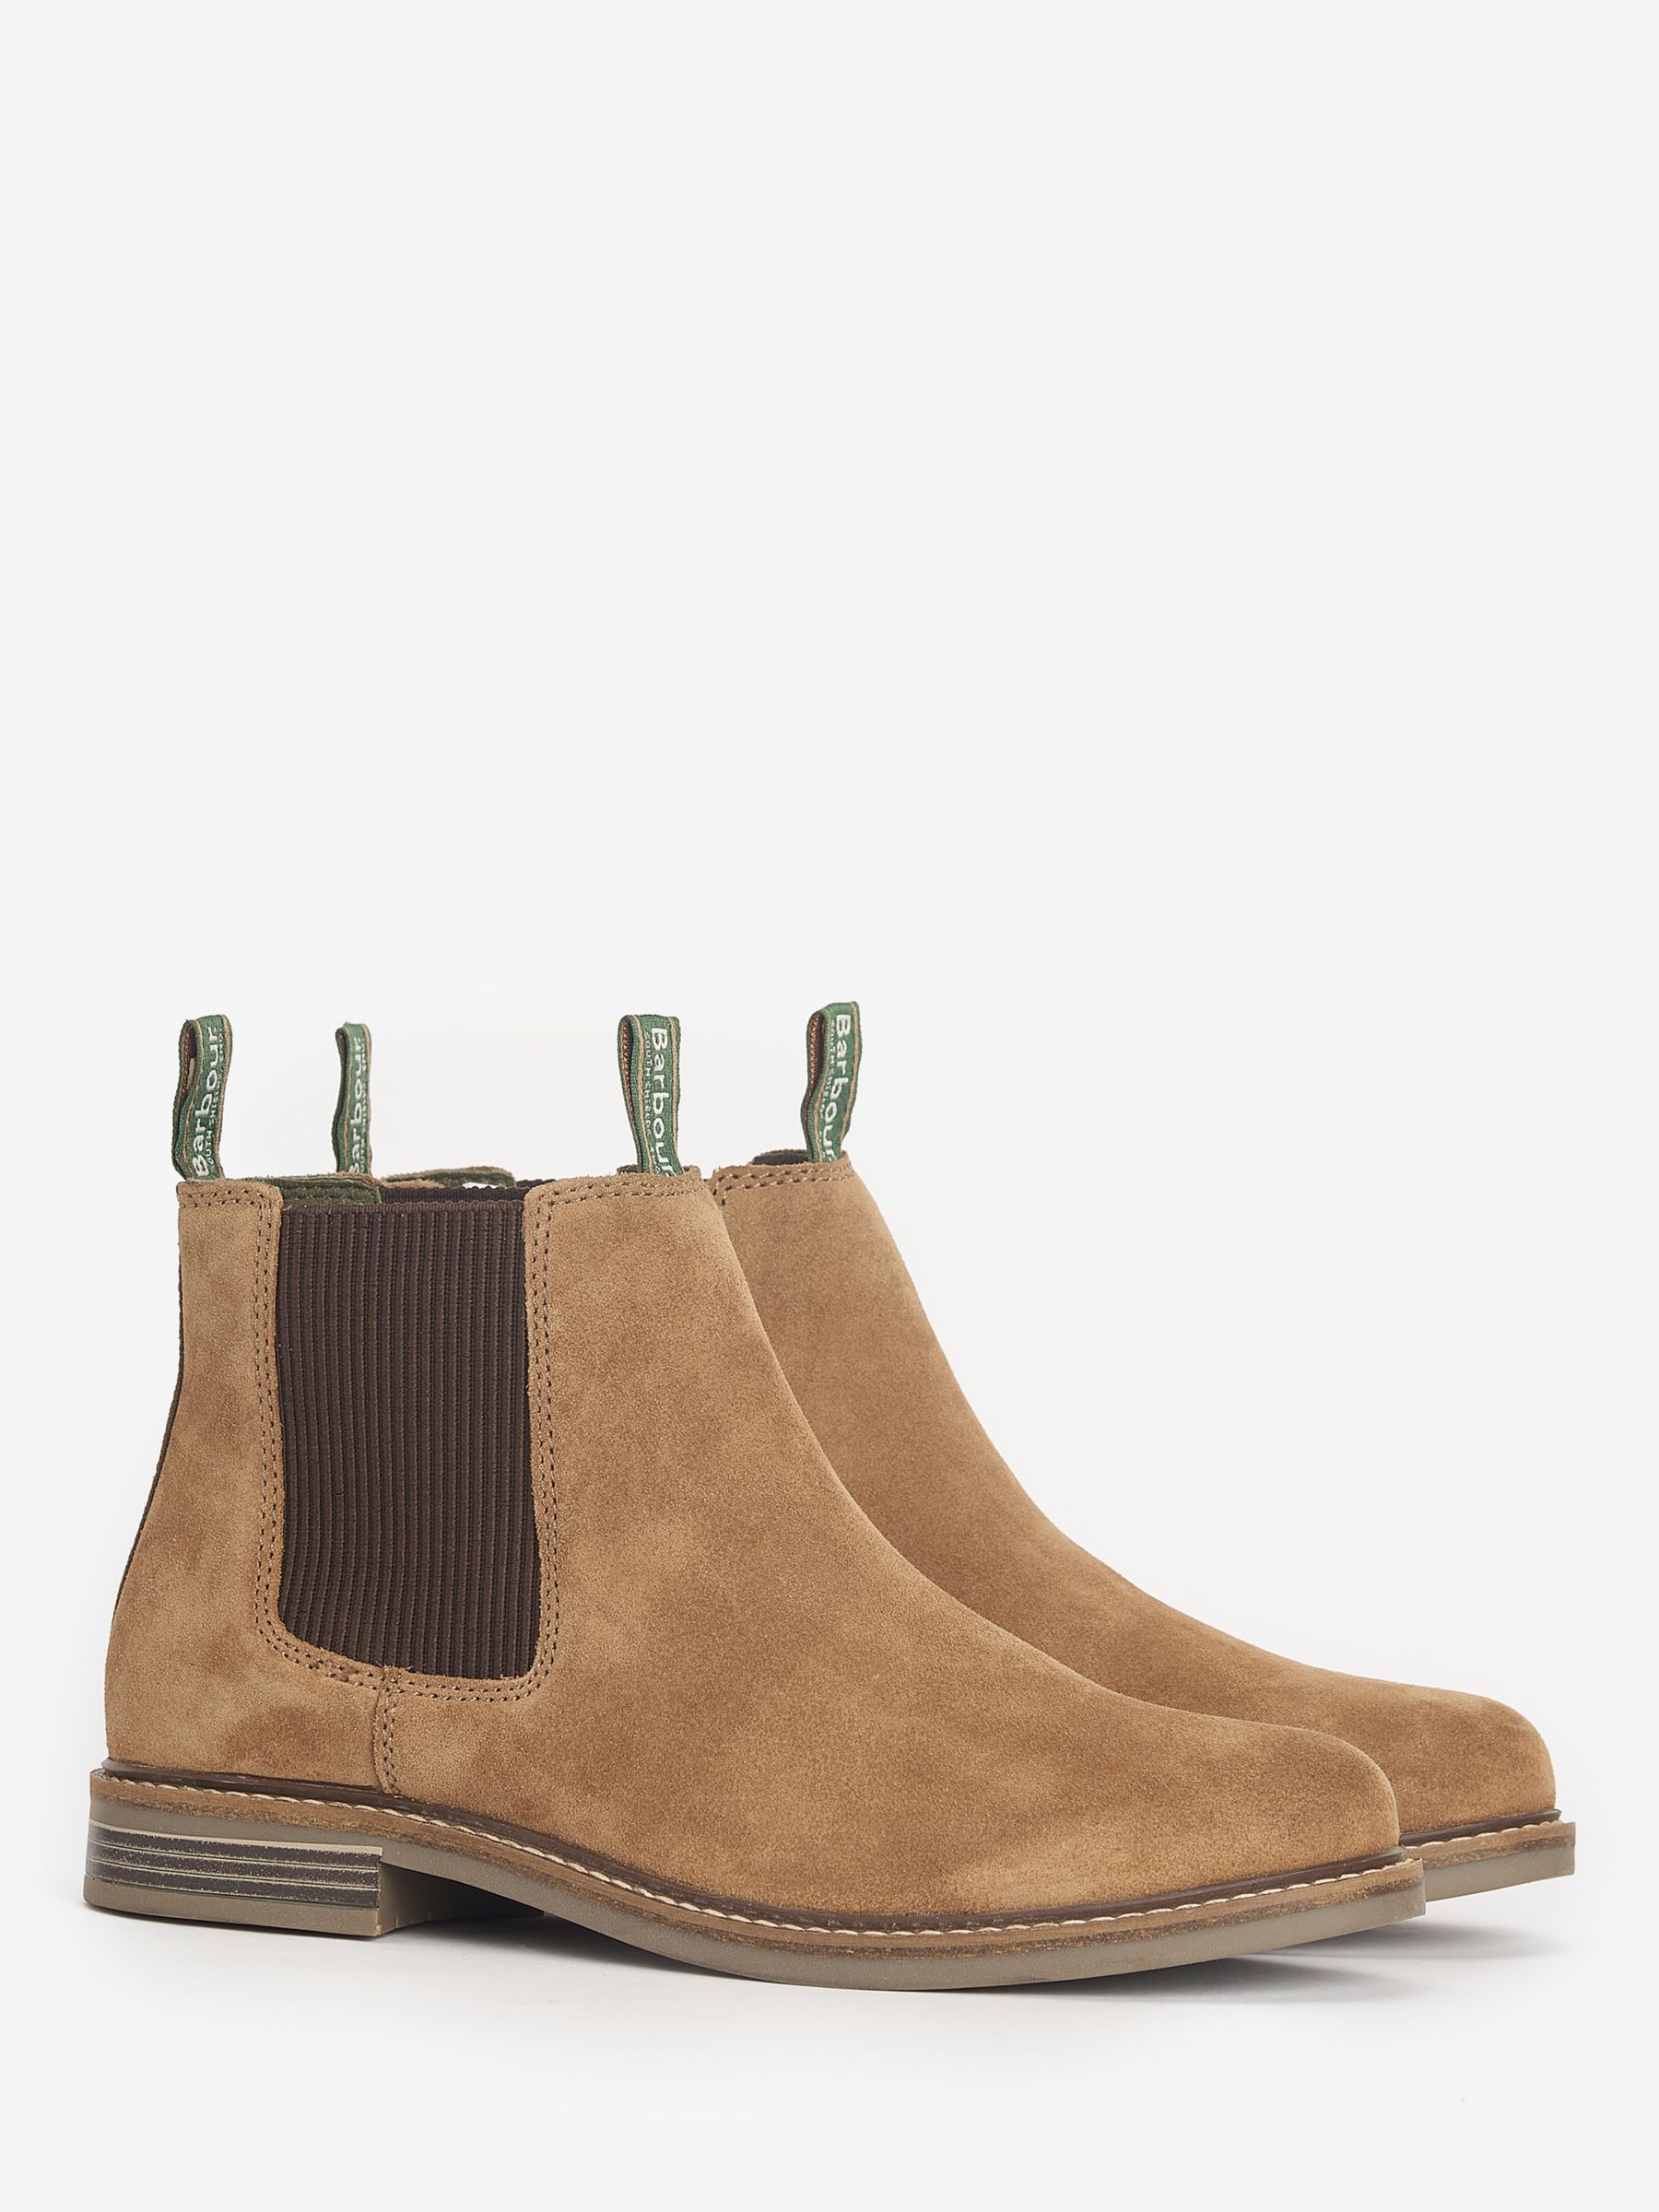 Barbour Farsley Fawn Suede Boots, Brown at John Lewis & Partners